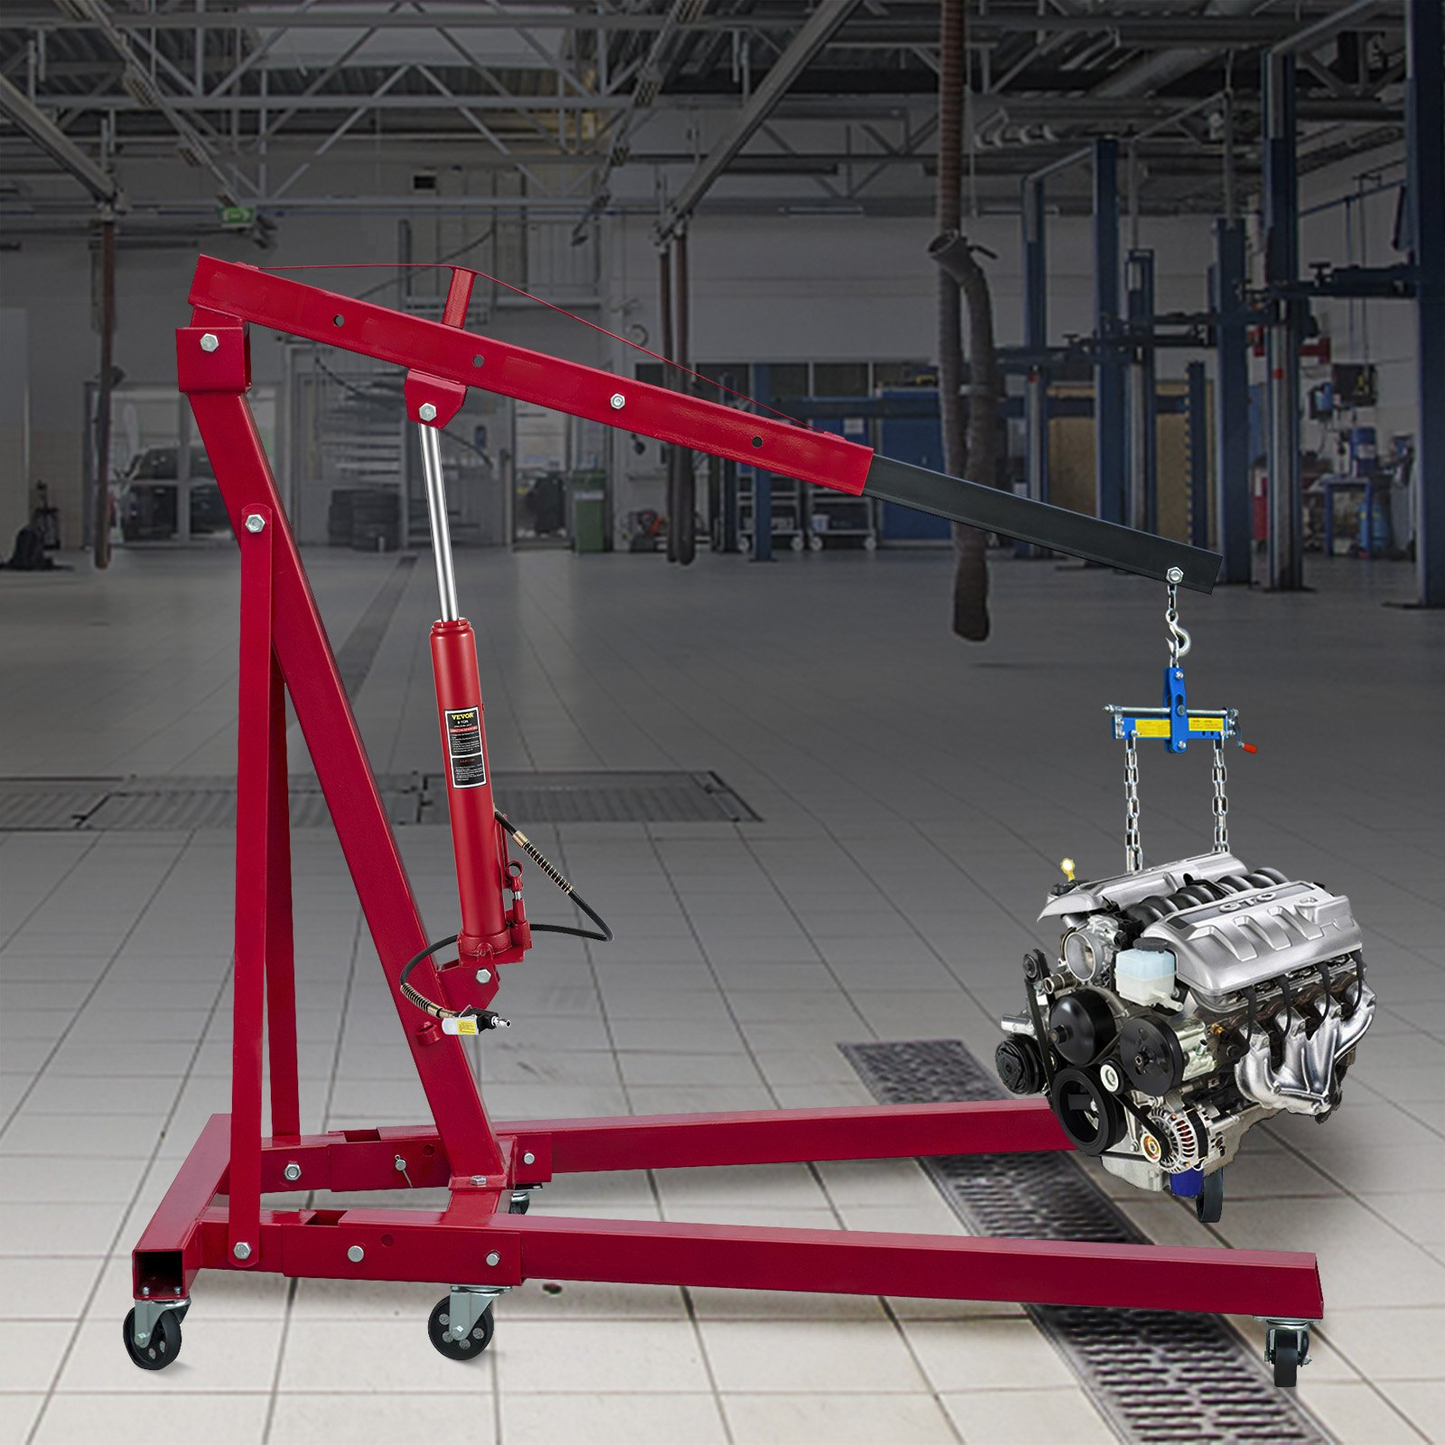 VEVOR Hydraulic/Pneumatic Long Ram Jack, 8 Tons/17363 lbs Capacity, with Single Piston Pump and Clevis Base, Manual Cherry Picker w/Handle, for Garage/Shop Cranes, Engine Lift Hoist, Red, Goodies N Stuff